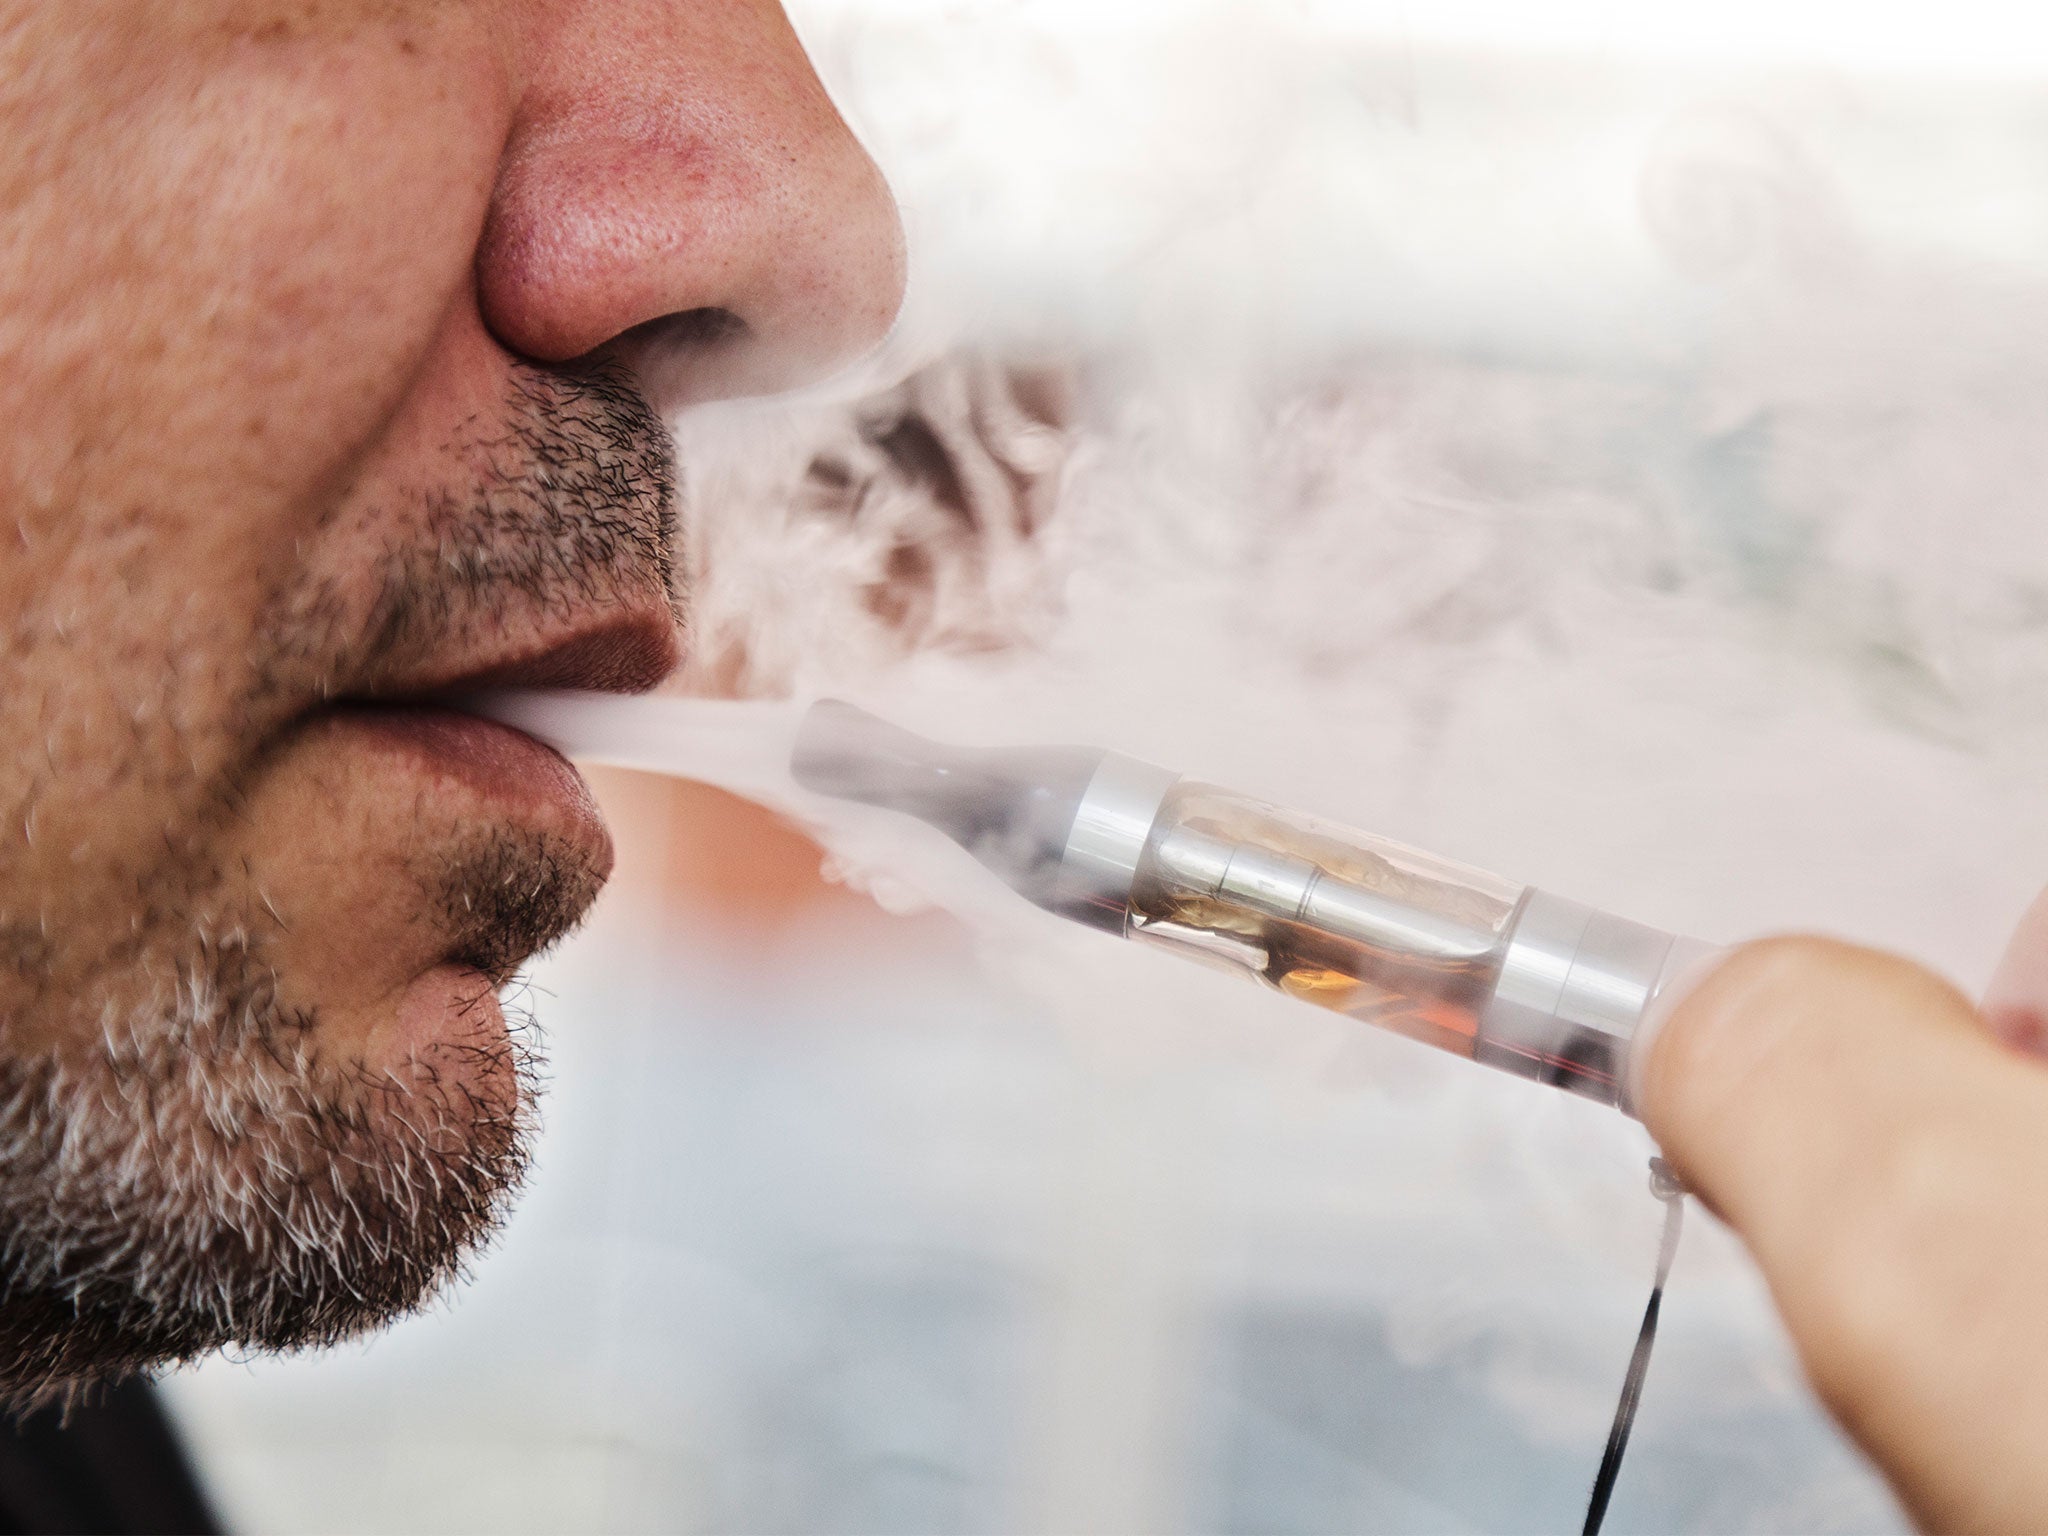 Vaping link to seizures in young people being investigated by US authorities